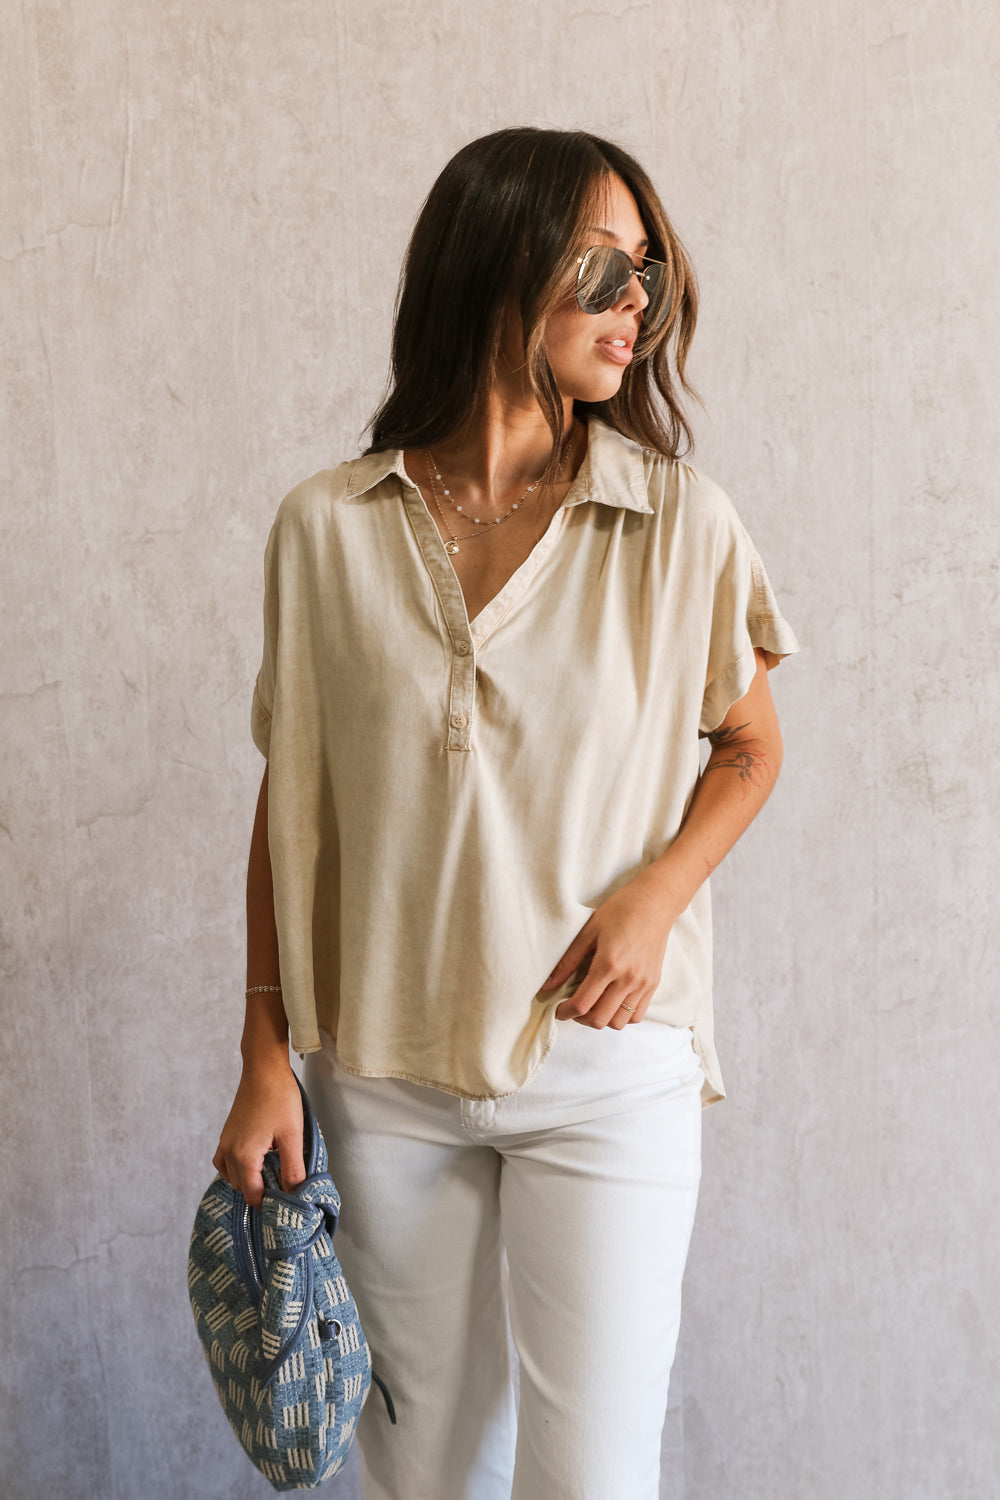 Upper body front view of female model wearing the Amalia Collared Short Sleeve Top in taupe, which has short sleeves and a collar neckline. Paired with white capris. Model is holding blue purse.